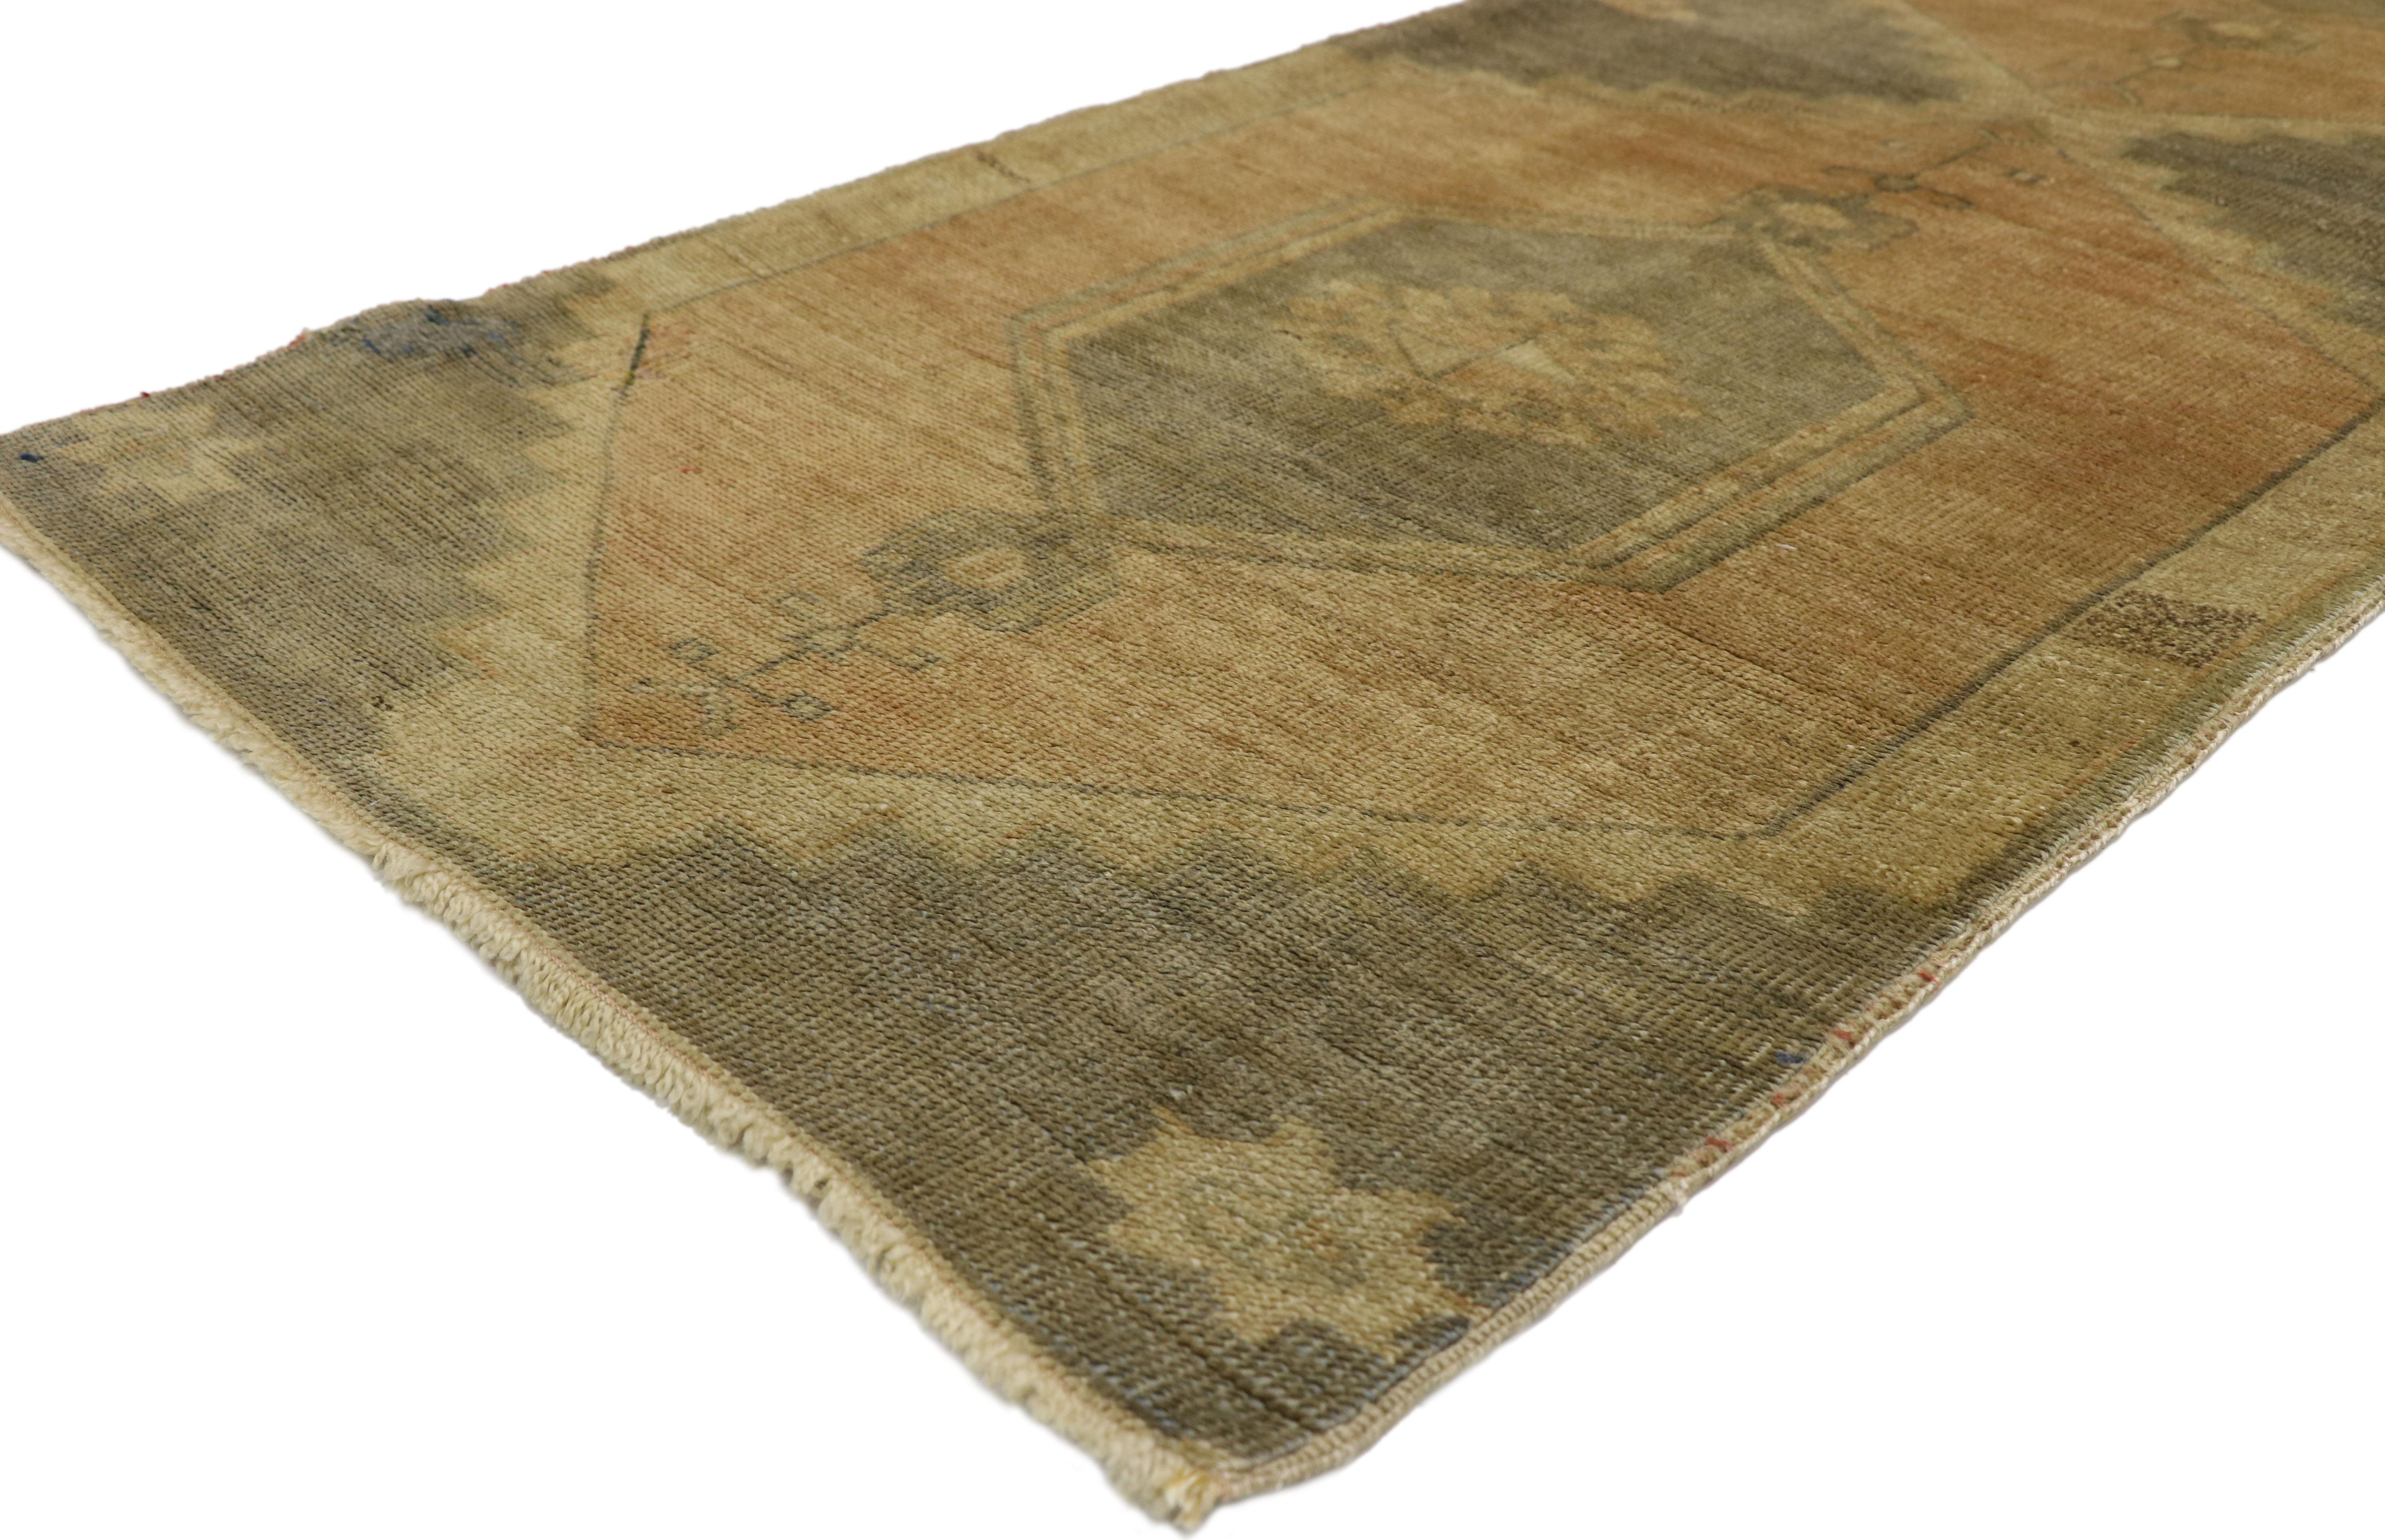 50038, Vintage Turkish Oushak Runner Runner with Mid-Century Modern Style 02'06 X 11'11. Emanating modern elegance and delightfully distinctive, this hand knotted wool vintage Turkish Oushak runner handsomely combines Mid-Century Modern style with